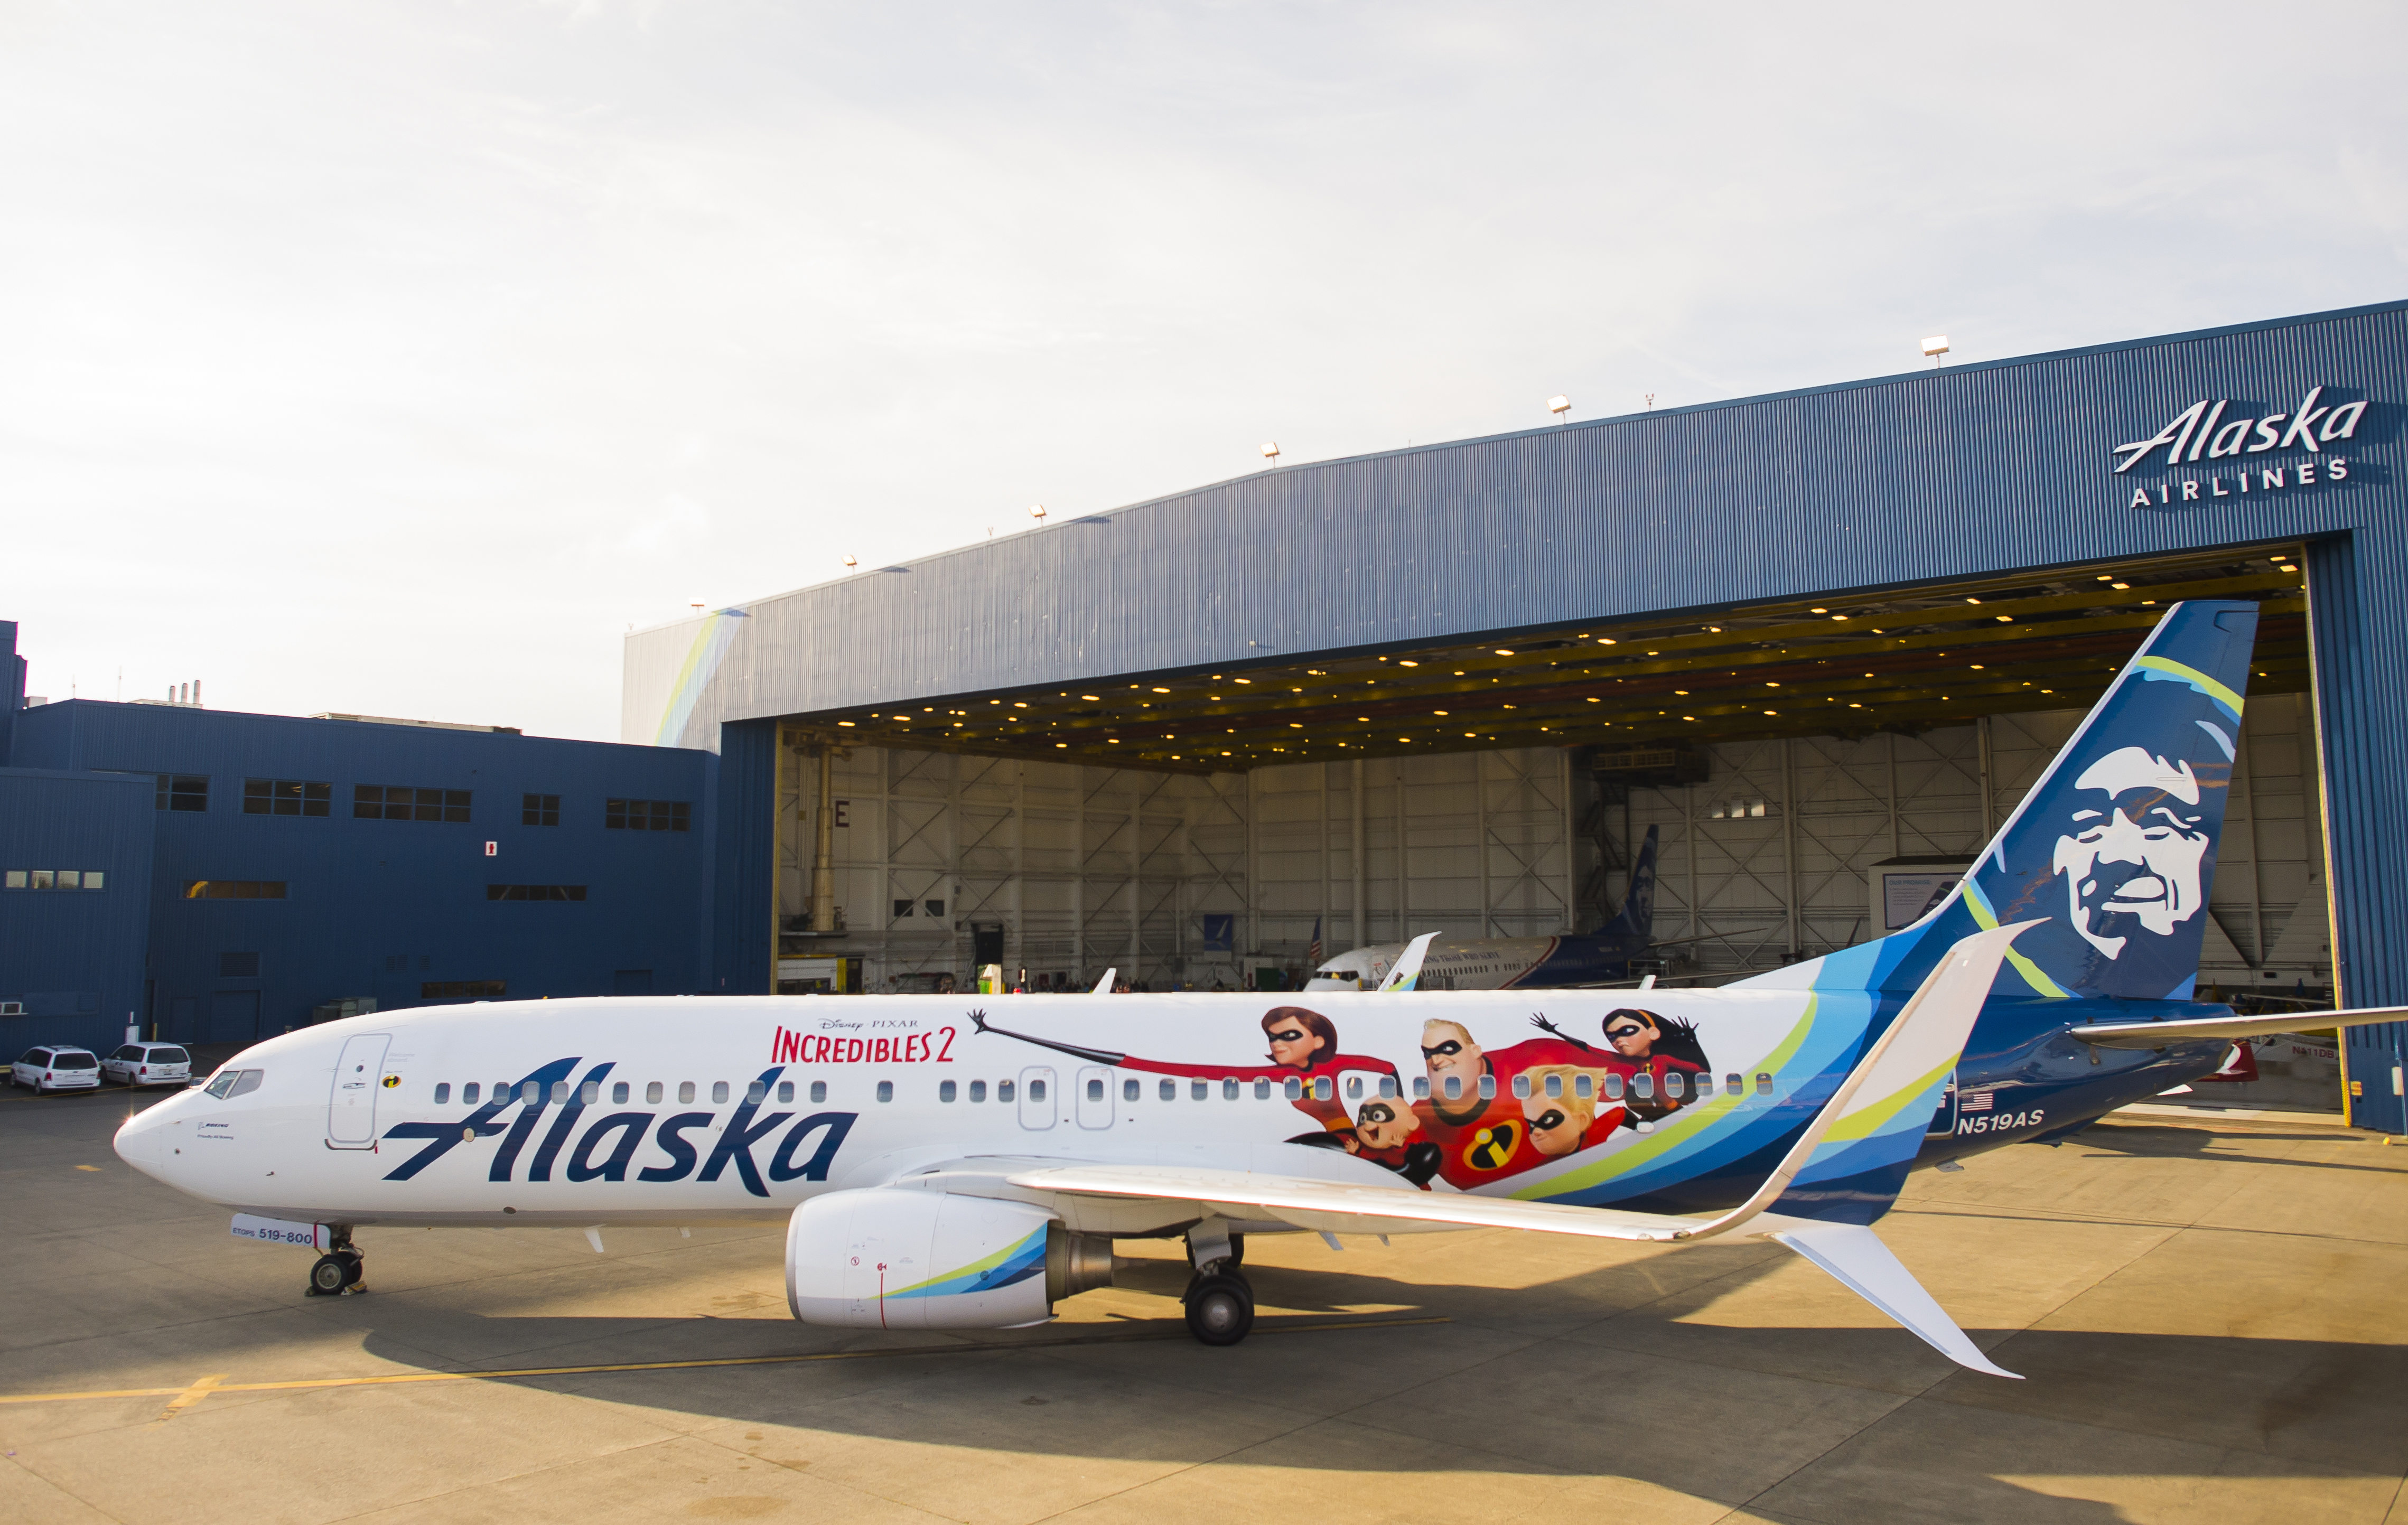 Alaska Airlines gets 'animated' with newly themed plane featuring artwork from Disney•Pixar's Incredibles 2